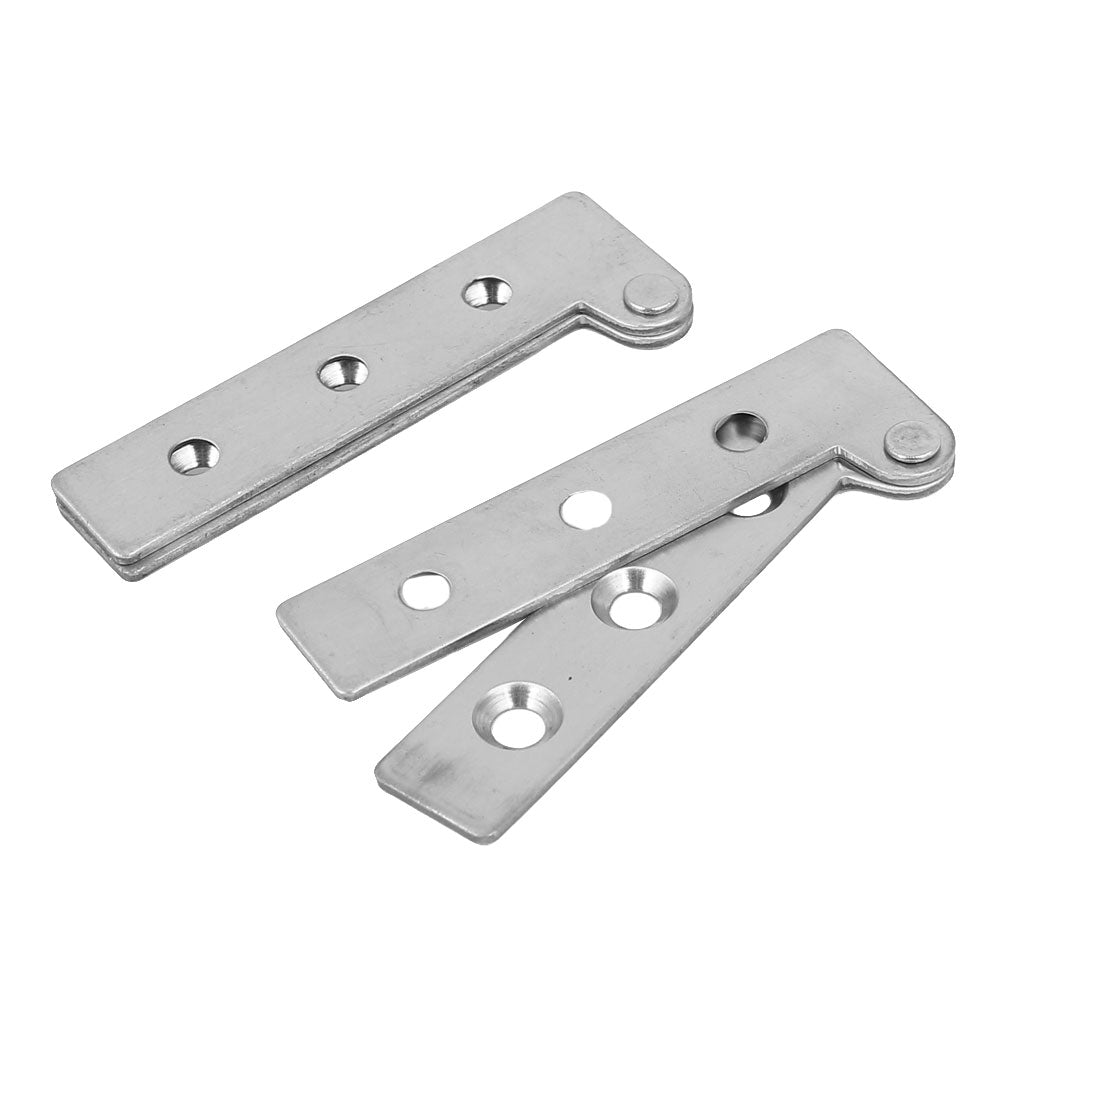 uxcell Uxcell Cupboard Door Stainless Steel Inset Pivot Hinge Silver Tone 64mm x 21.5mm 2PCS